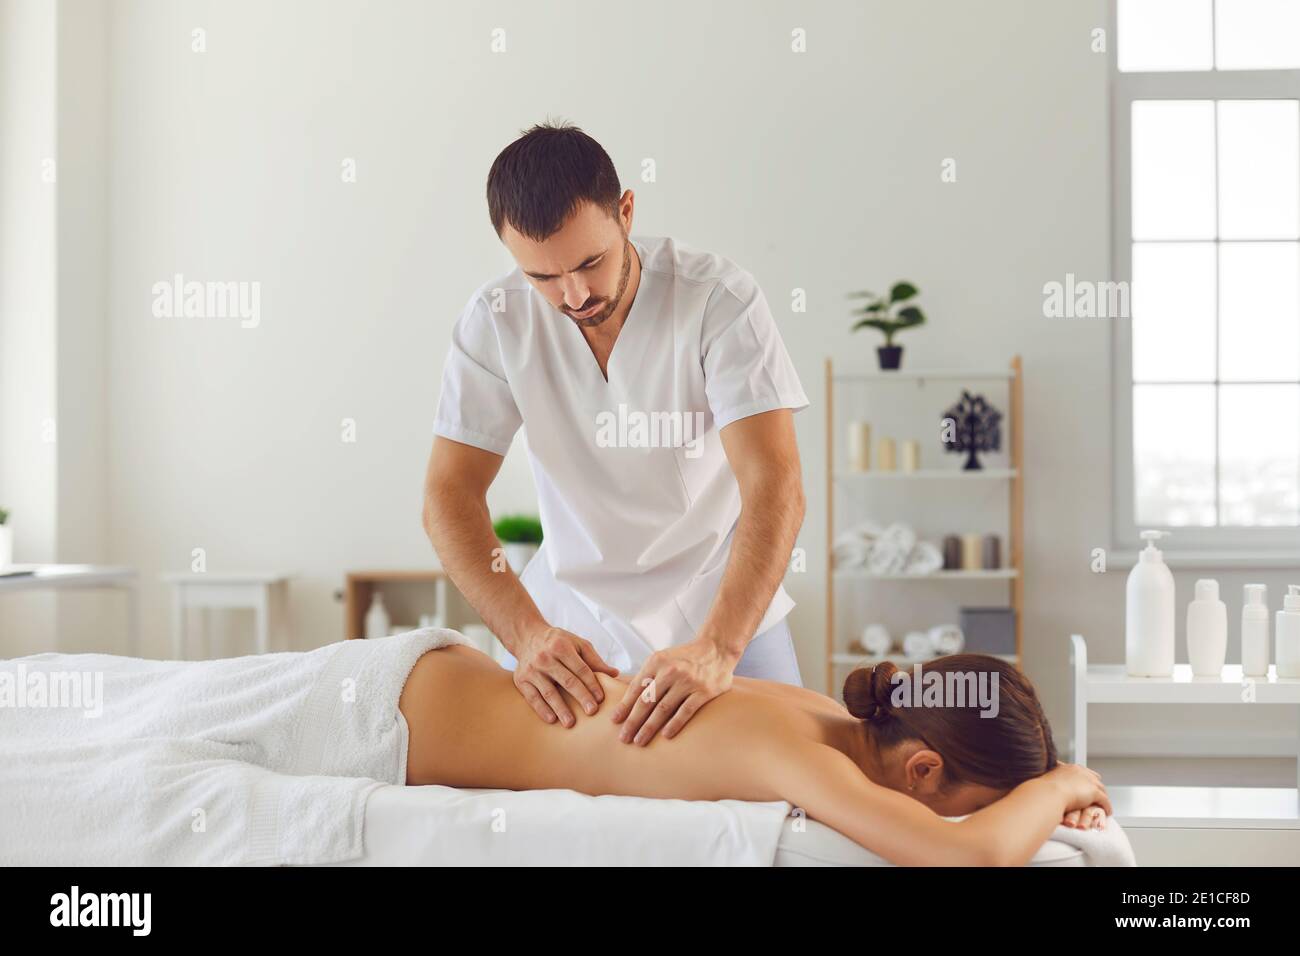 Massage parlor hi-res stock photography and images image